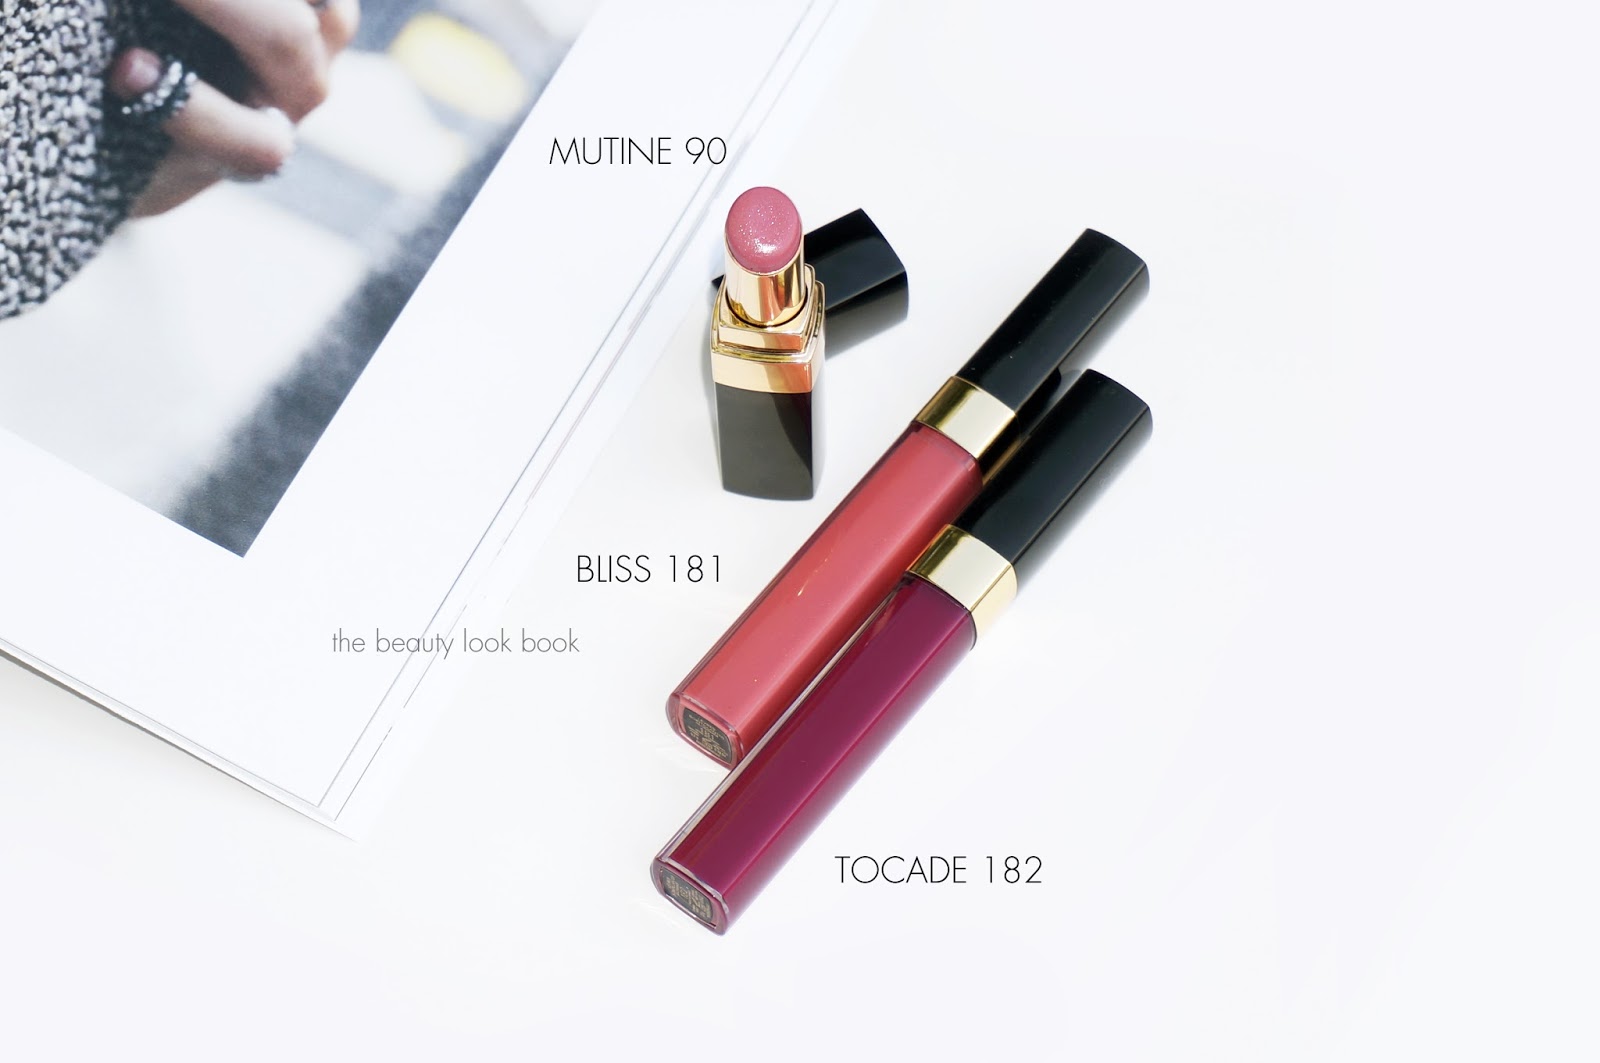 Fragrance Archives - Page 3 of 11 - The Beauty Look Book